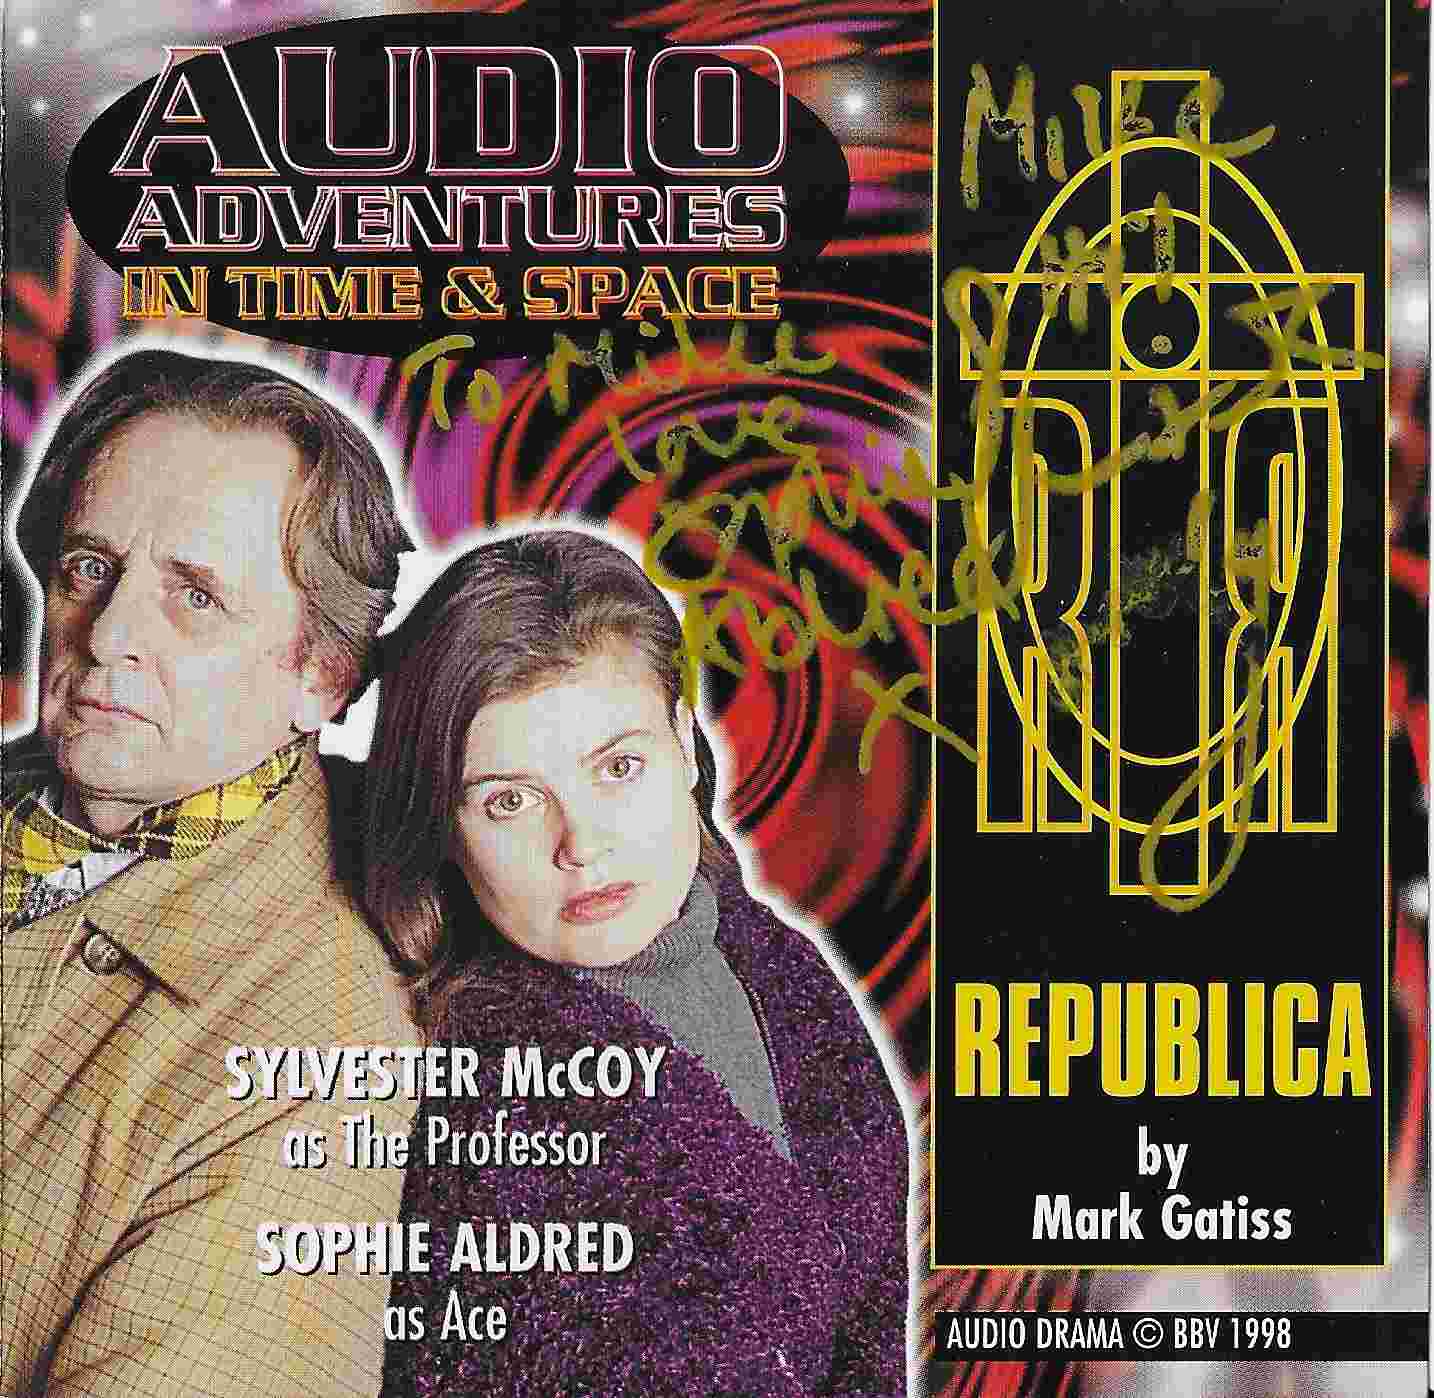 Picture of The Professor and Ace - Republica by artist Mark Gatiss from the BBC cds - Records and Tapes library